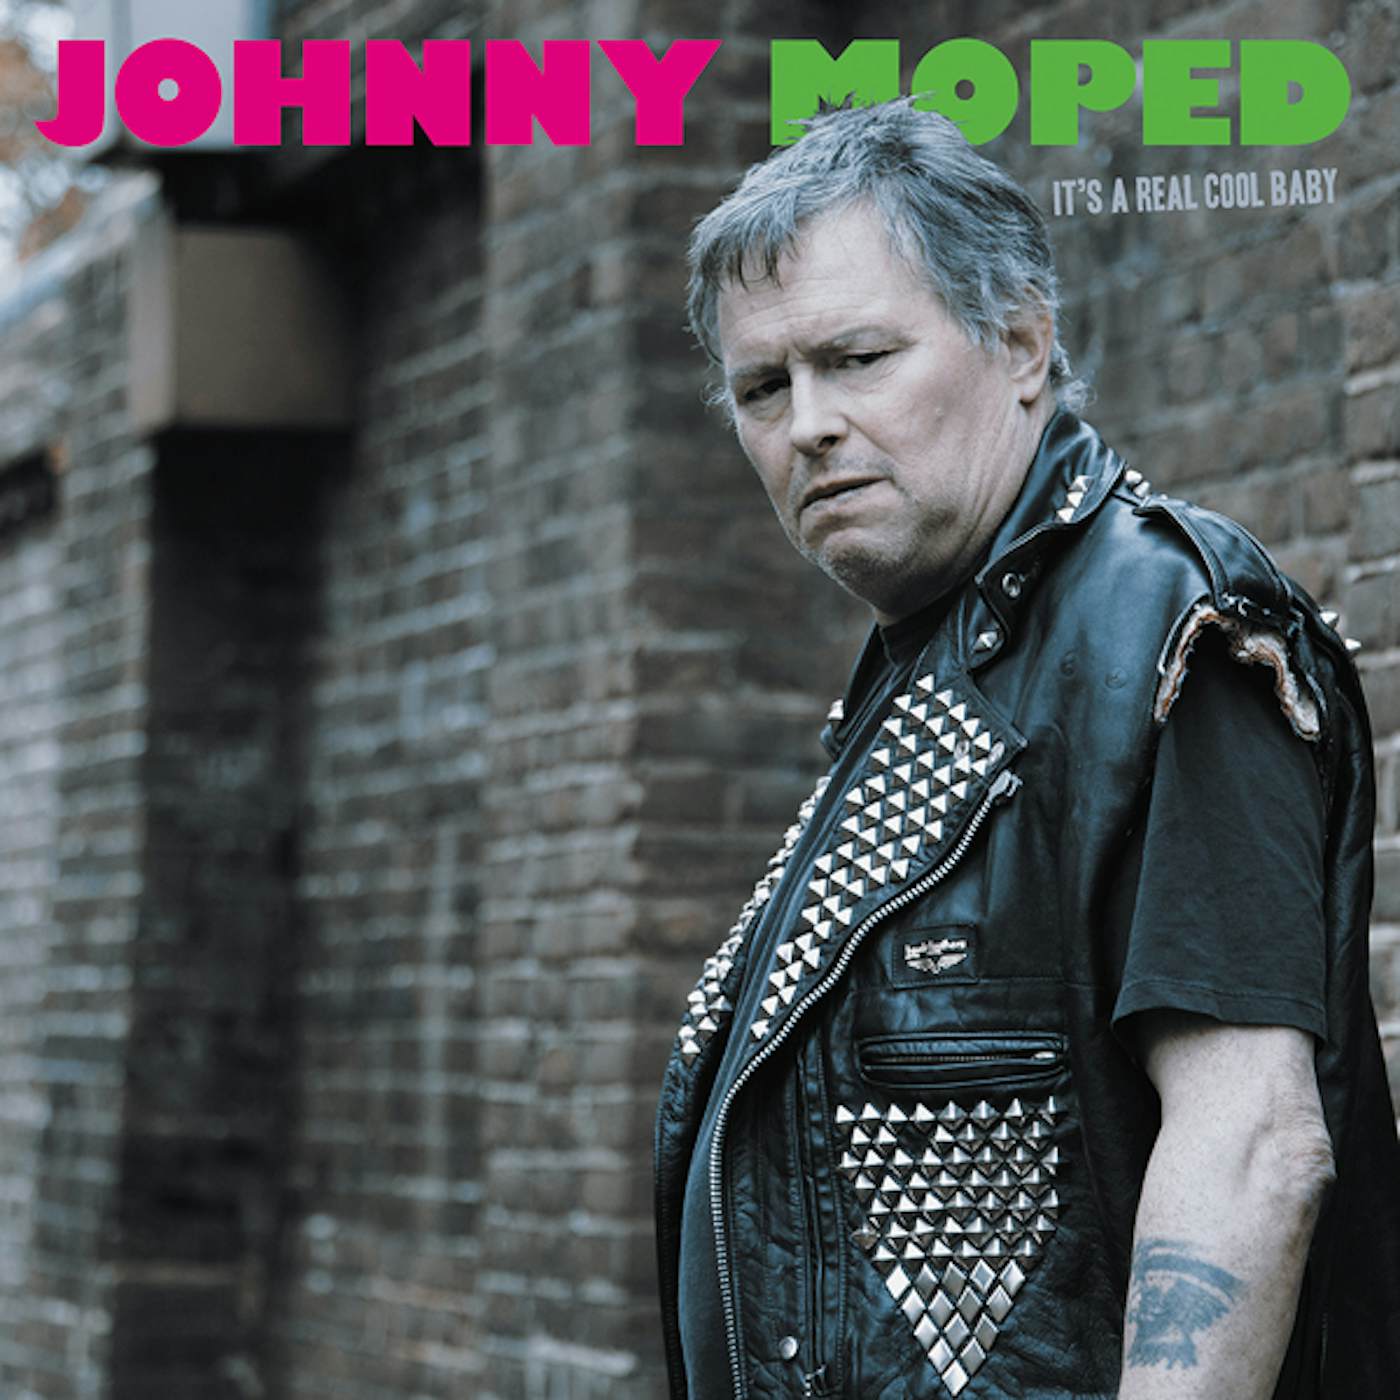 Johnny Moped It's a Real Cool Baby Vinyl Record